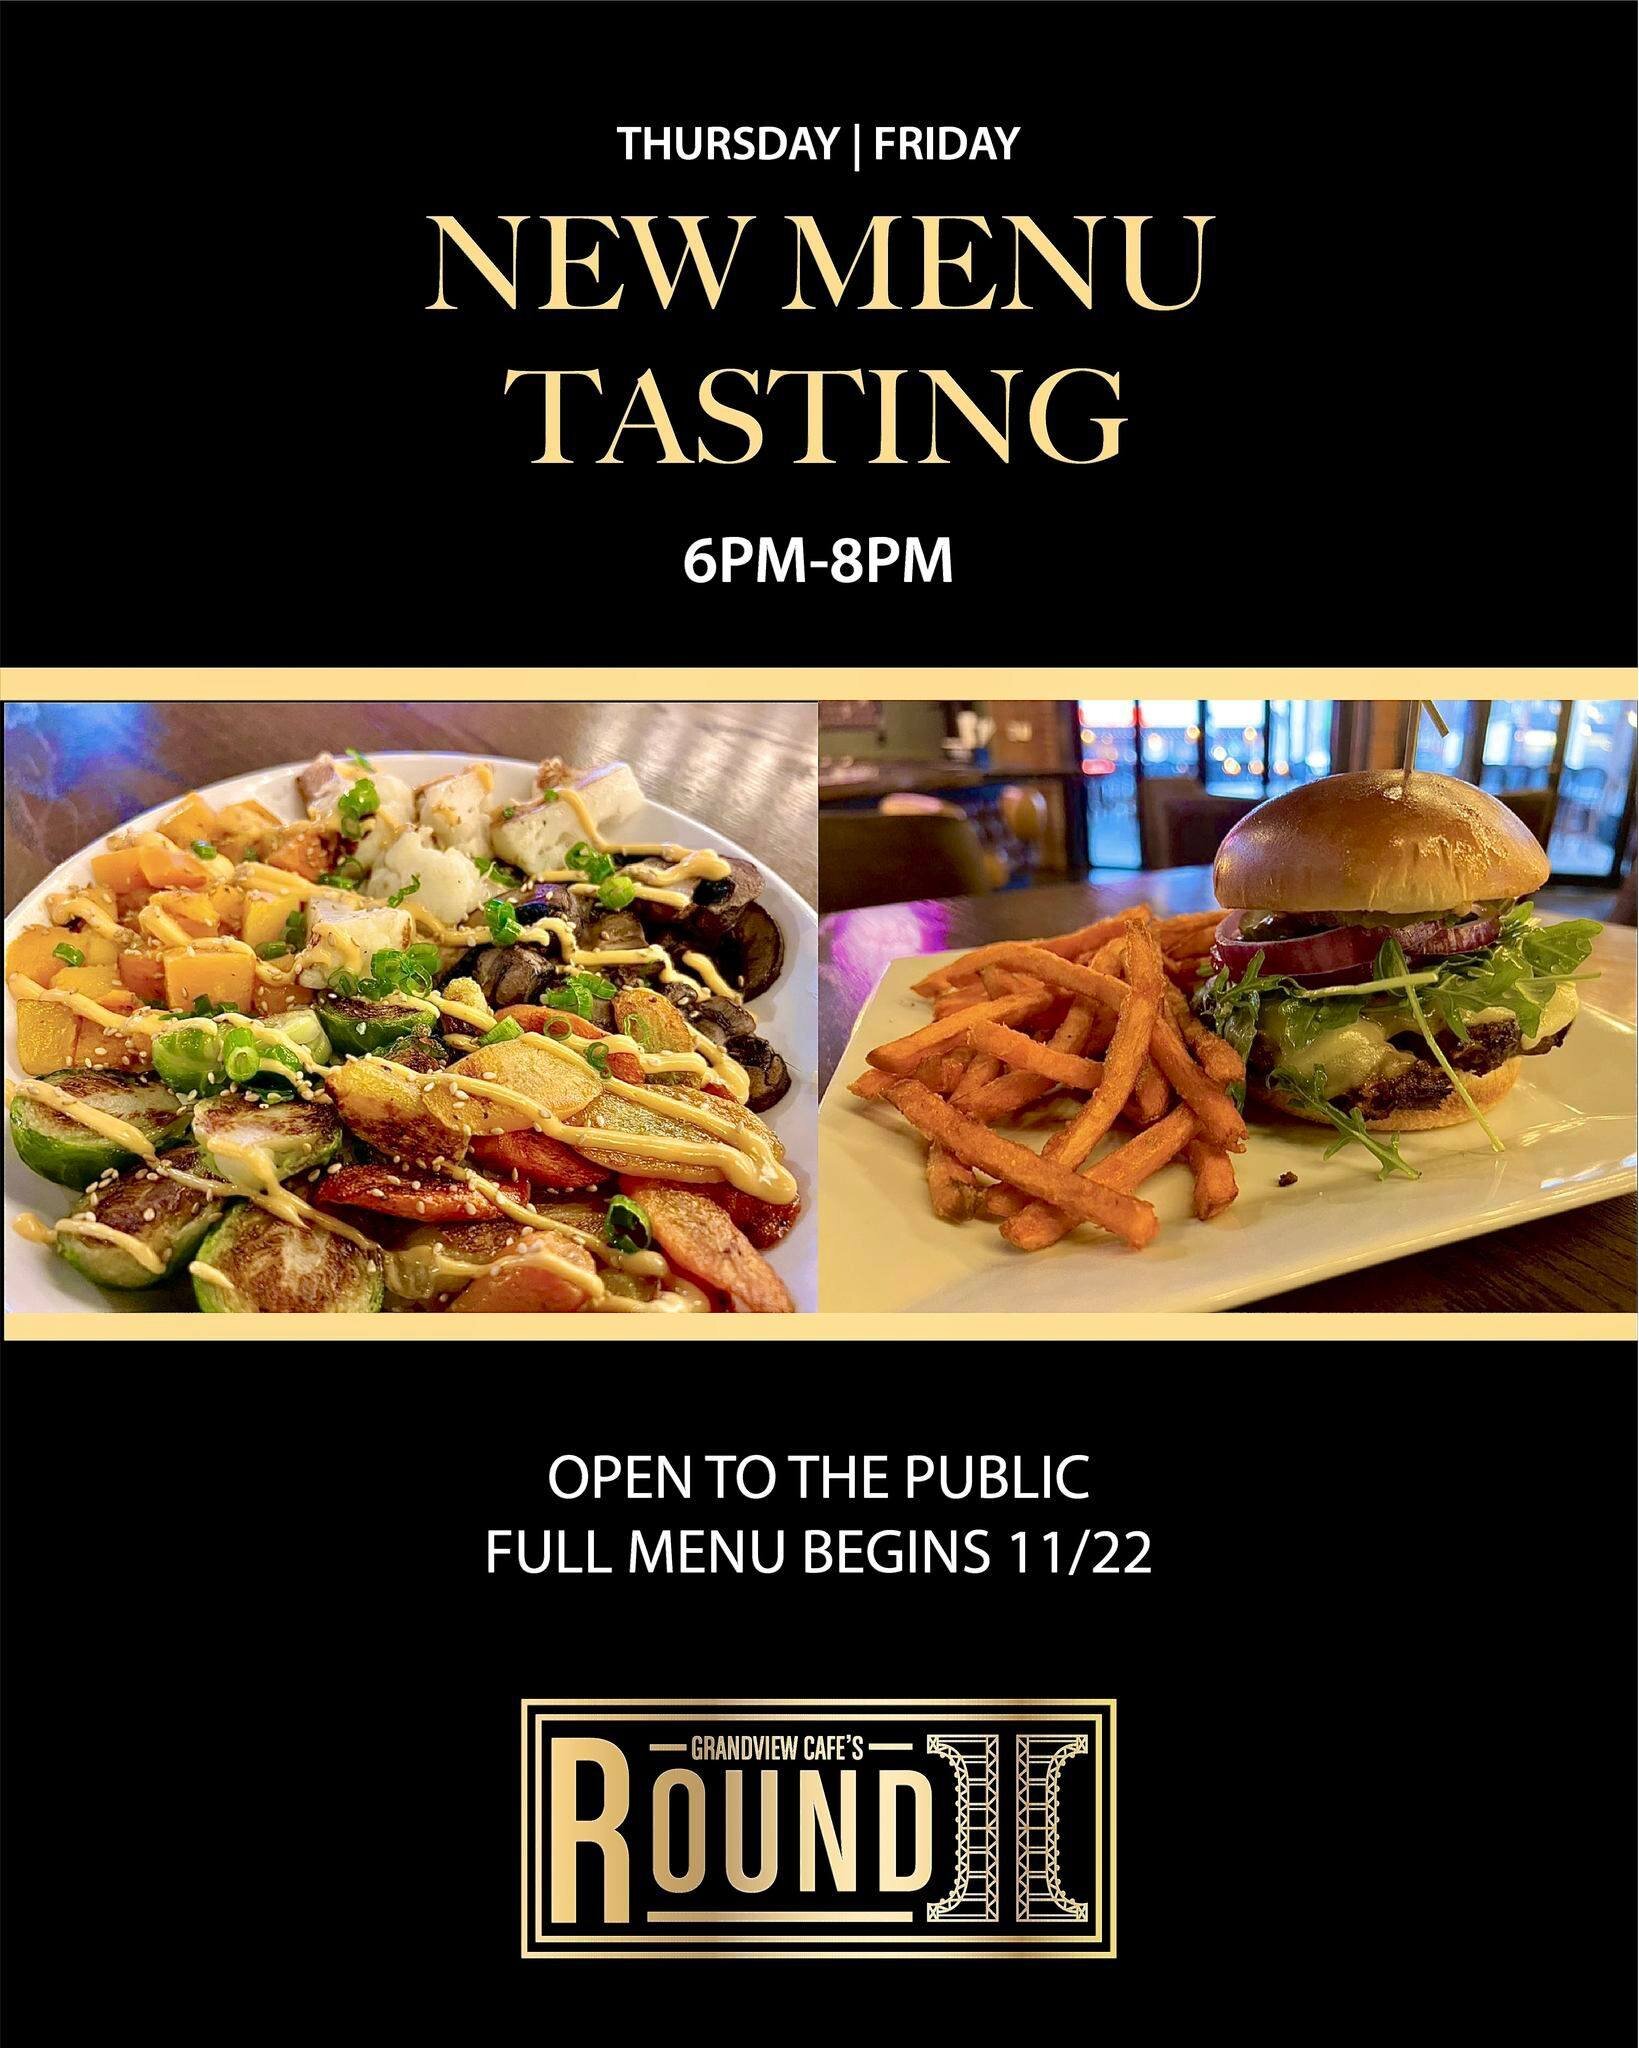 THURSDAY, FRIDAY | We&rsquo;re shaking things up! A brand new menu is coming soon to Round 2! There&rsquo;s something for everyone. Tastings will be available during happy hour (6pm-8pm)  Thursday and Friday with the full menu going live on Tuesday 1